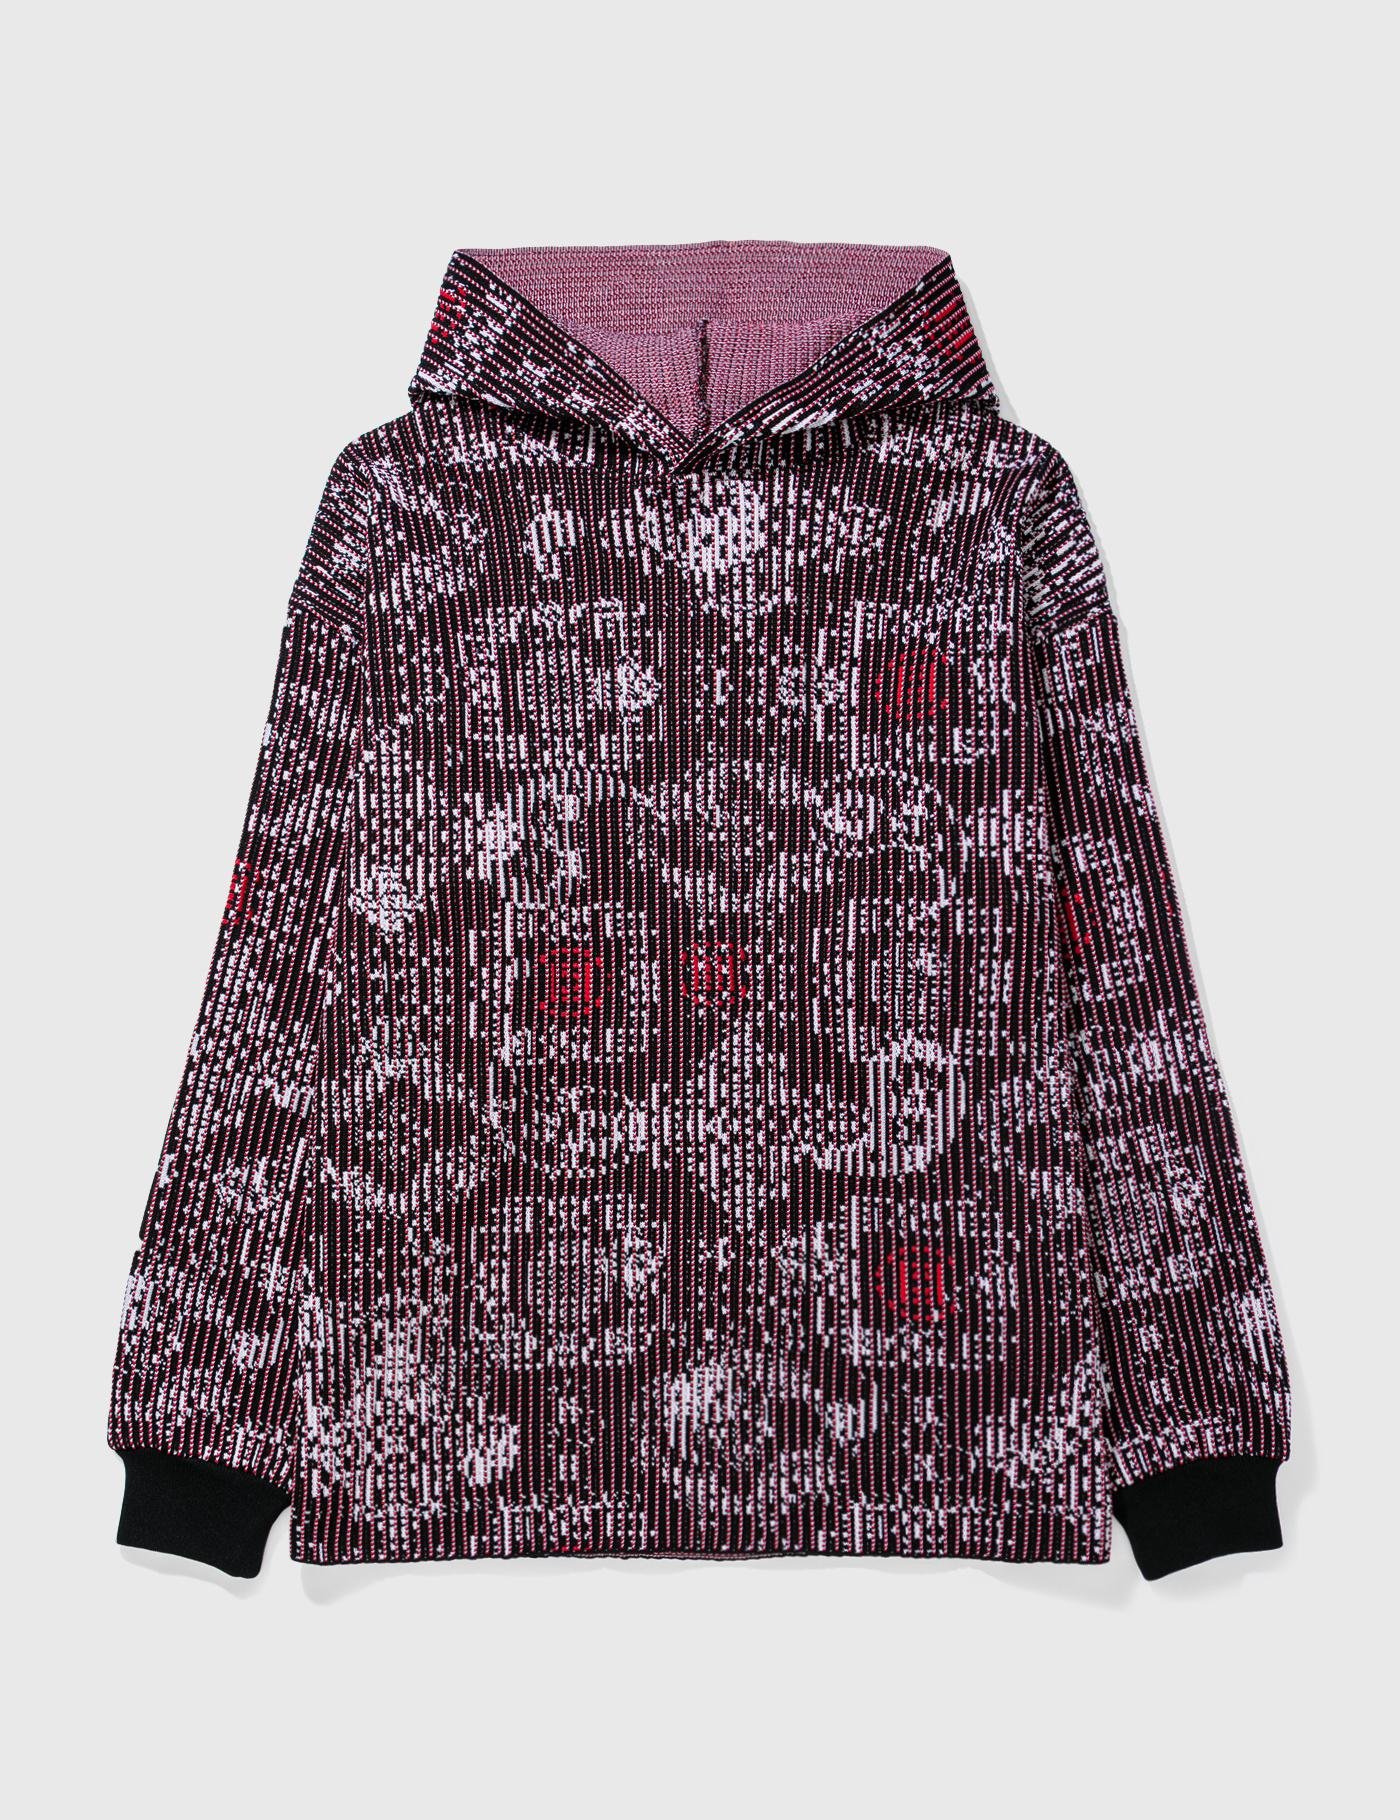 CLOT HOODED PULLOVER by CLOT